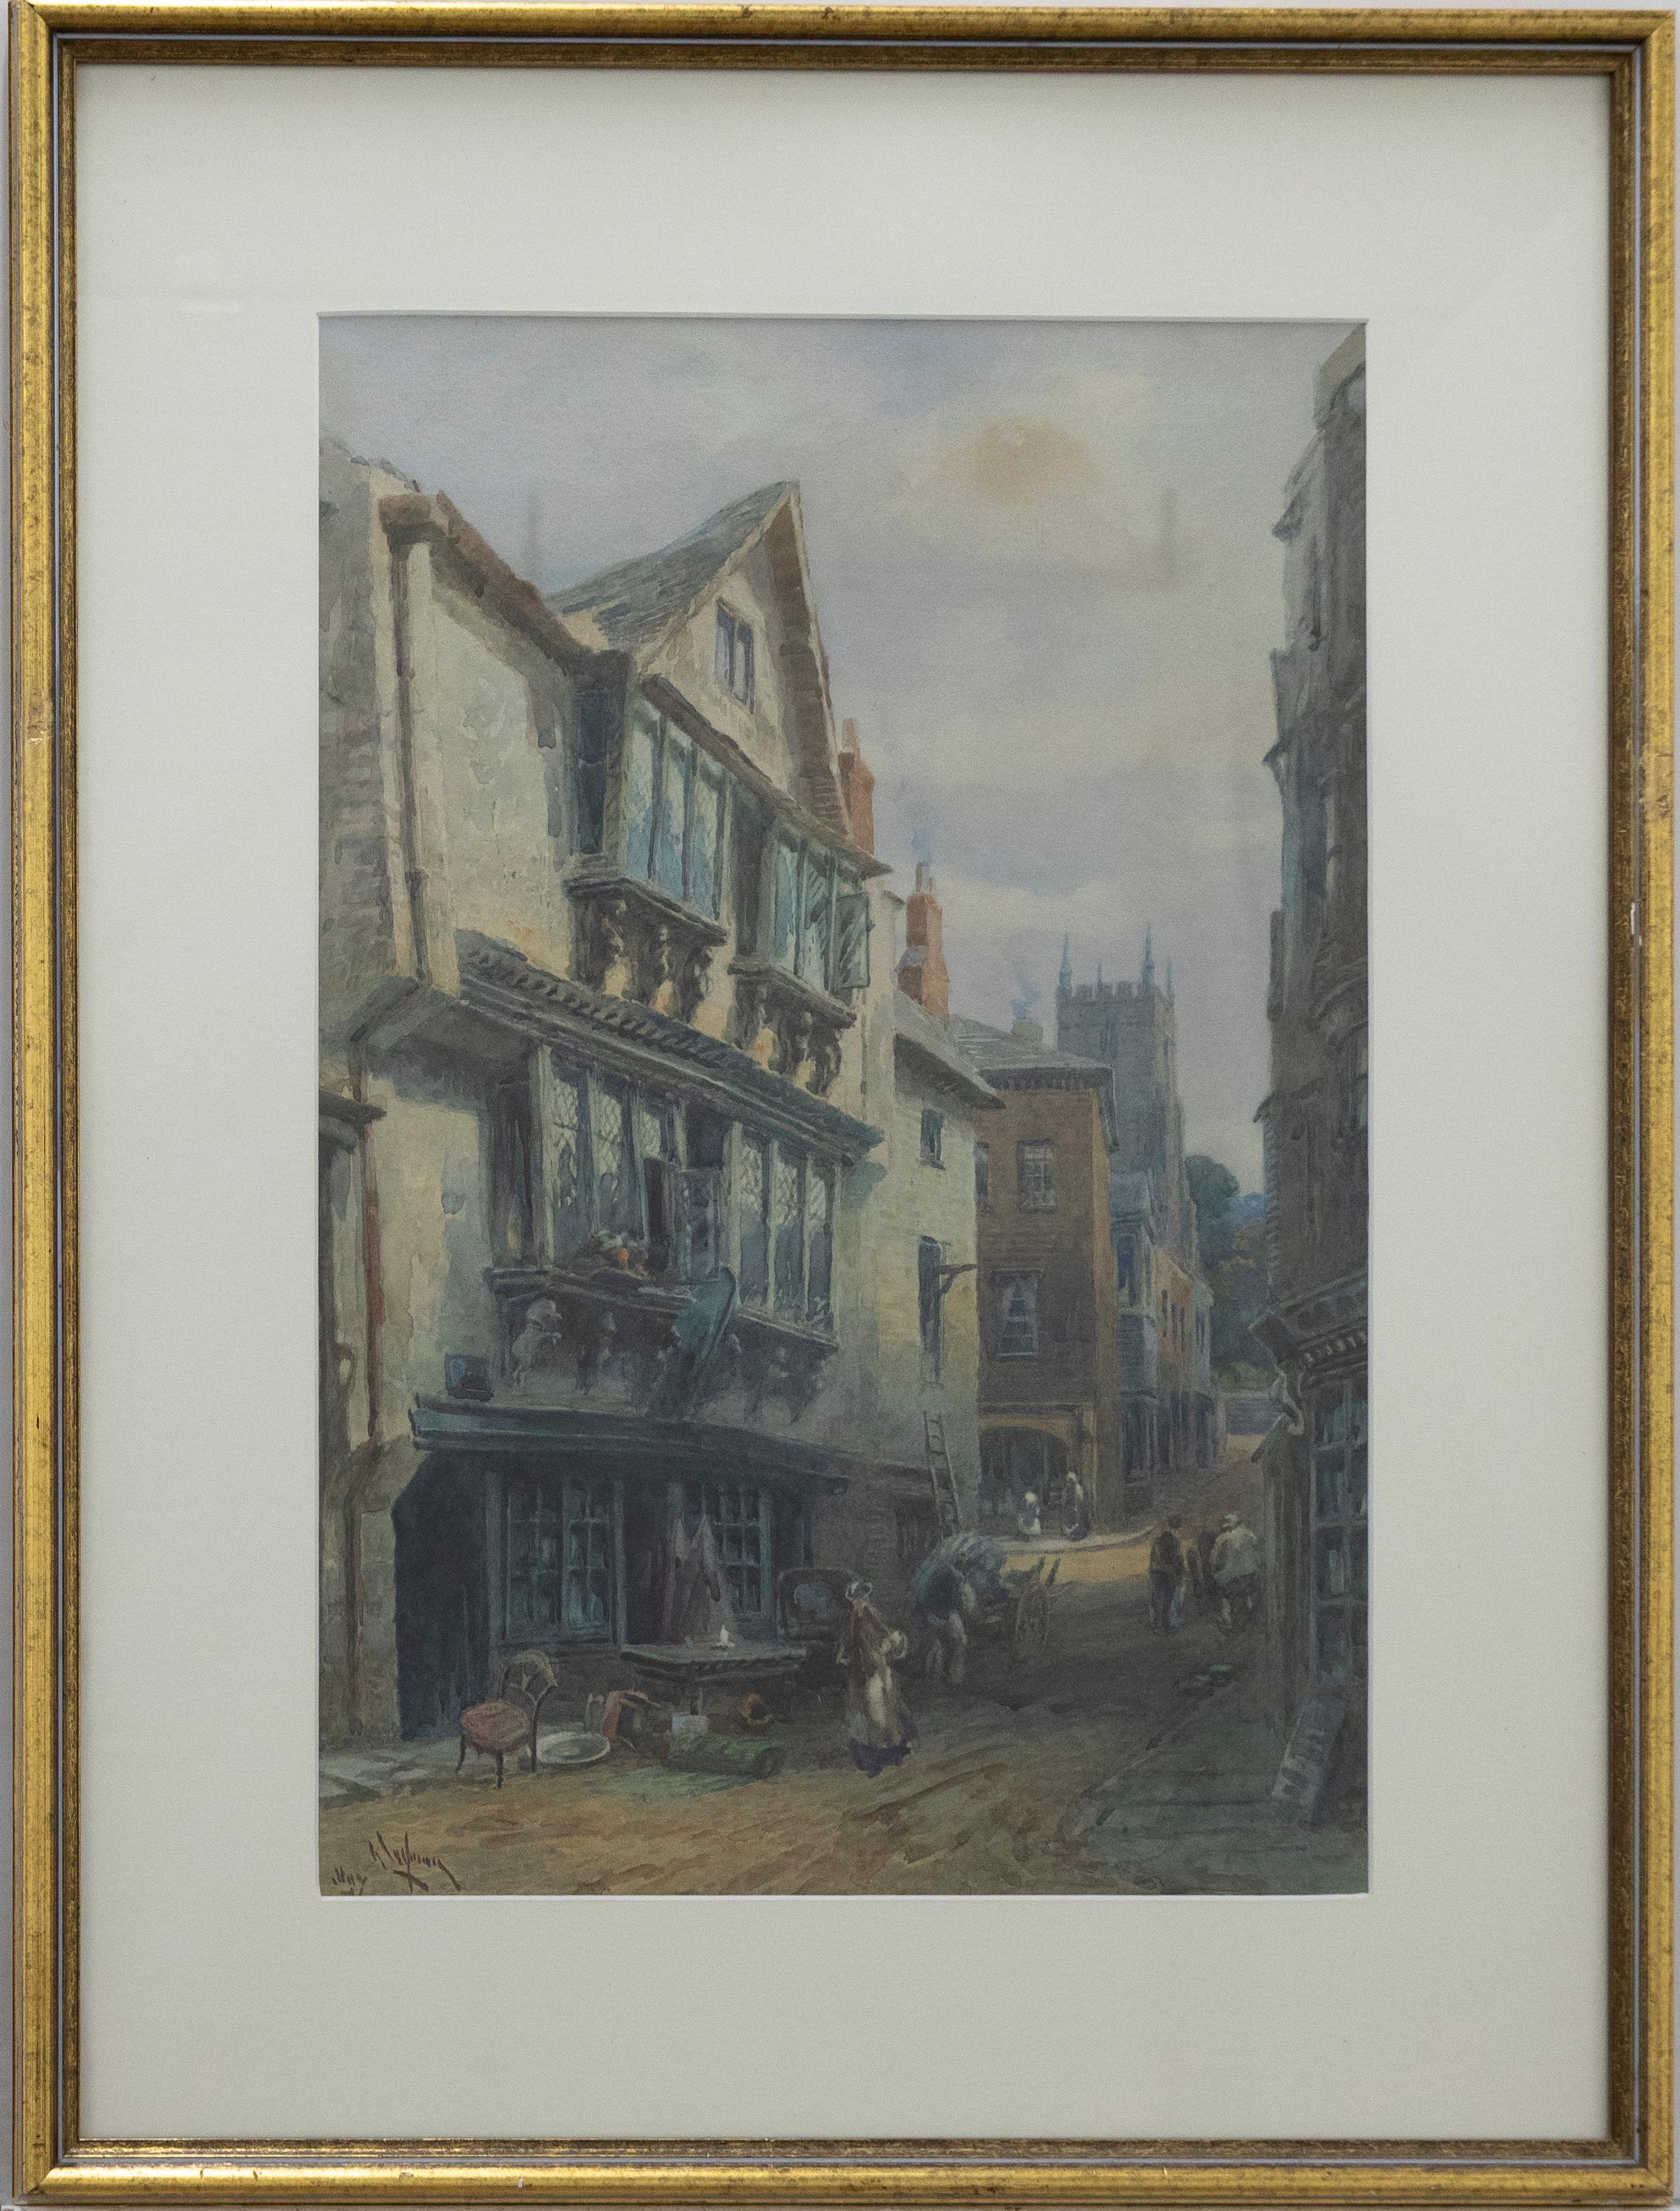 A charming late 19th century watercolour showing an old medieval street with figure wondering past piles of unwanted furniture from the local inn. The watercolour has been indistinctly signed to the lower left. Presented in an attractive gilt frame